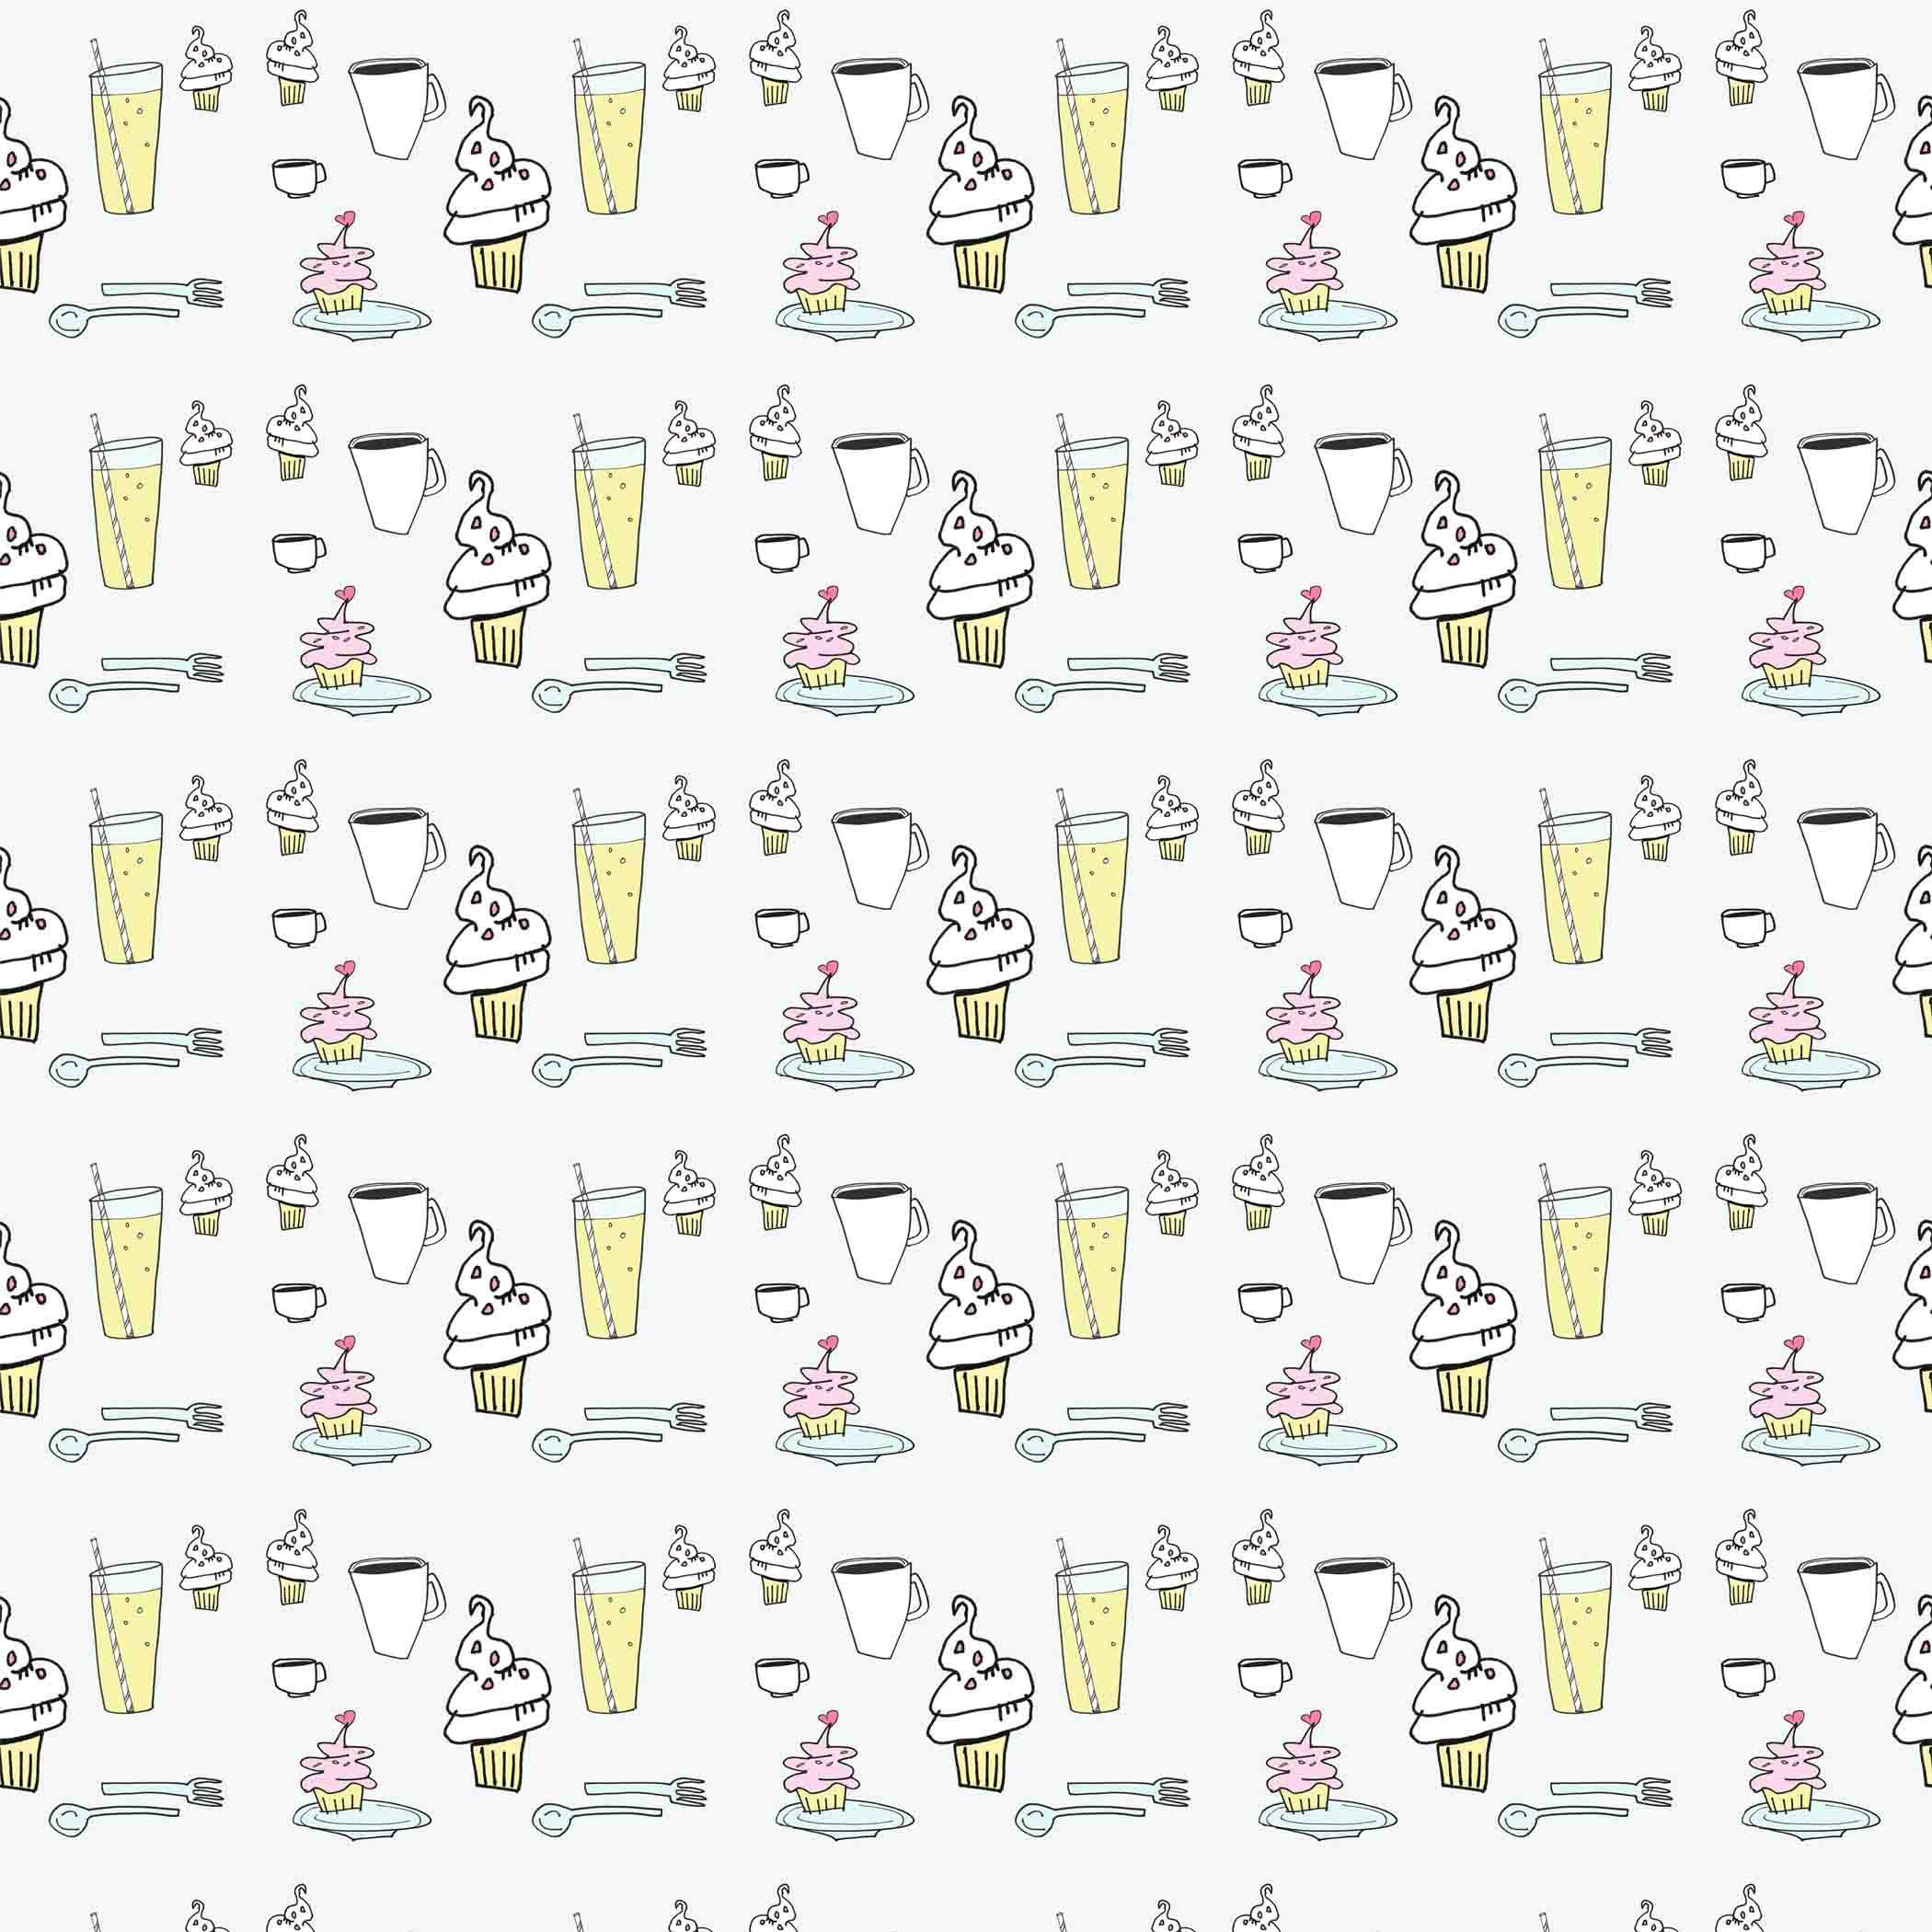 art every day number 521 / pattern illustration / the cupcake’s return